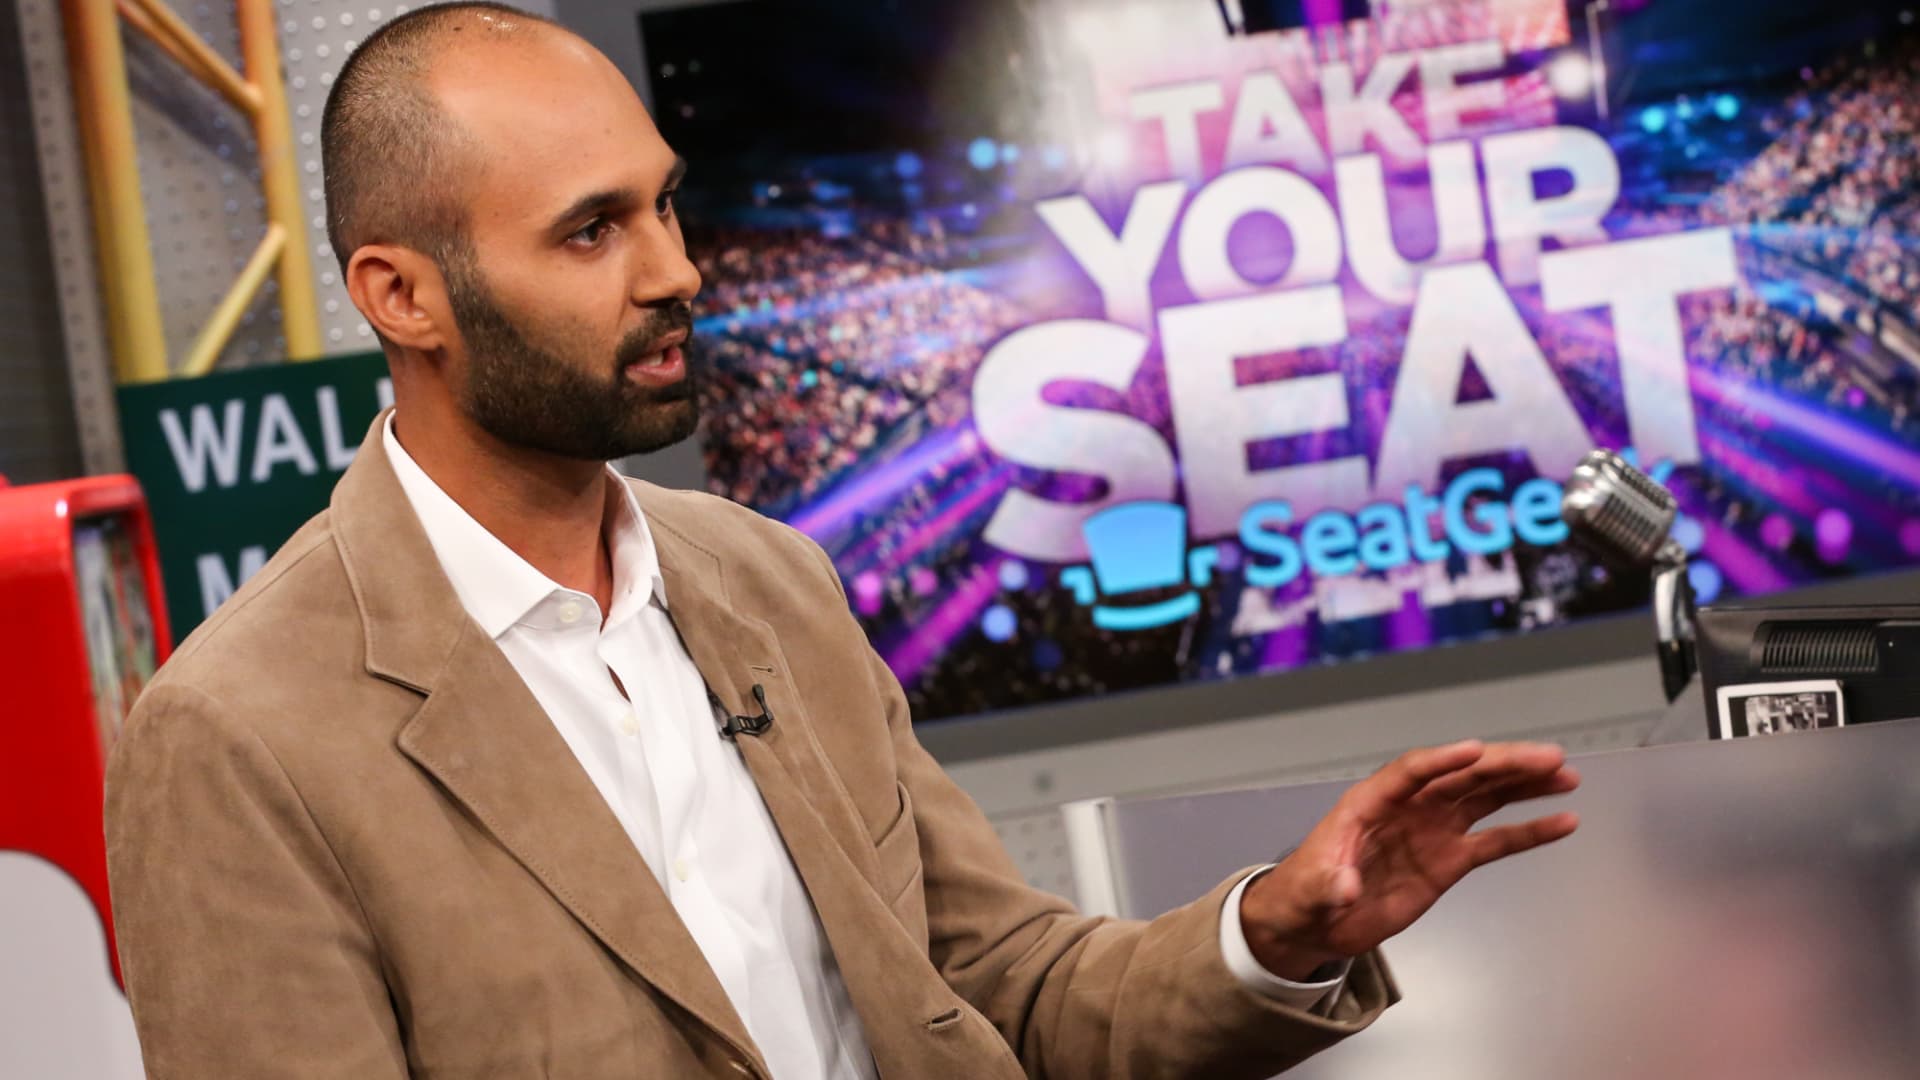 Russell D'Souza, co-founder of SeatGeek